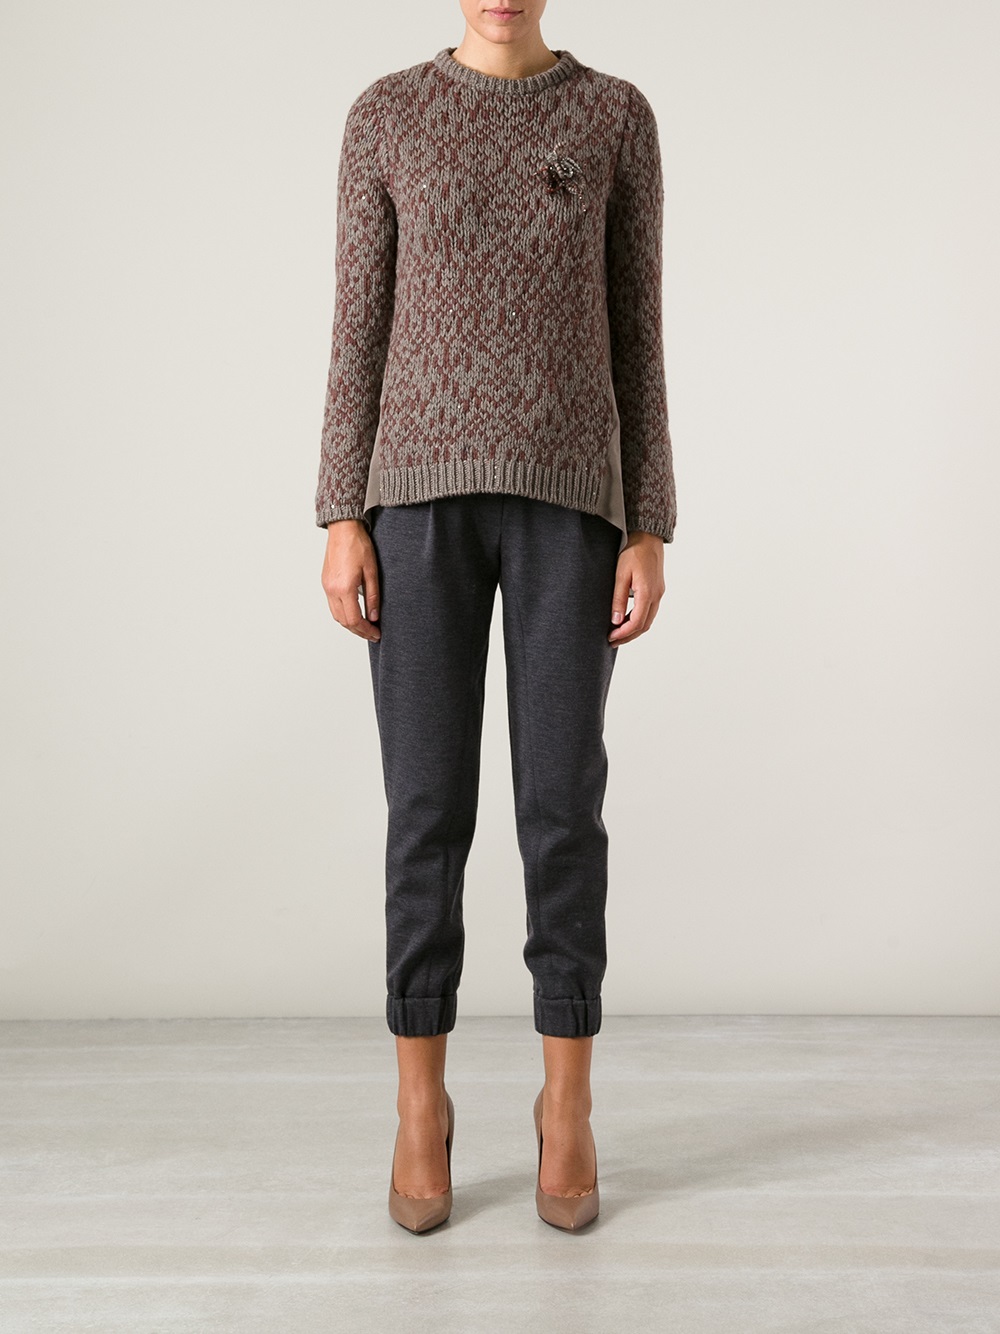 Lyst - Brunello Cucinelli Chunky Knit Crew Neck Sweater in Brown